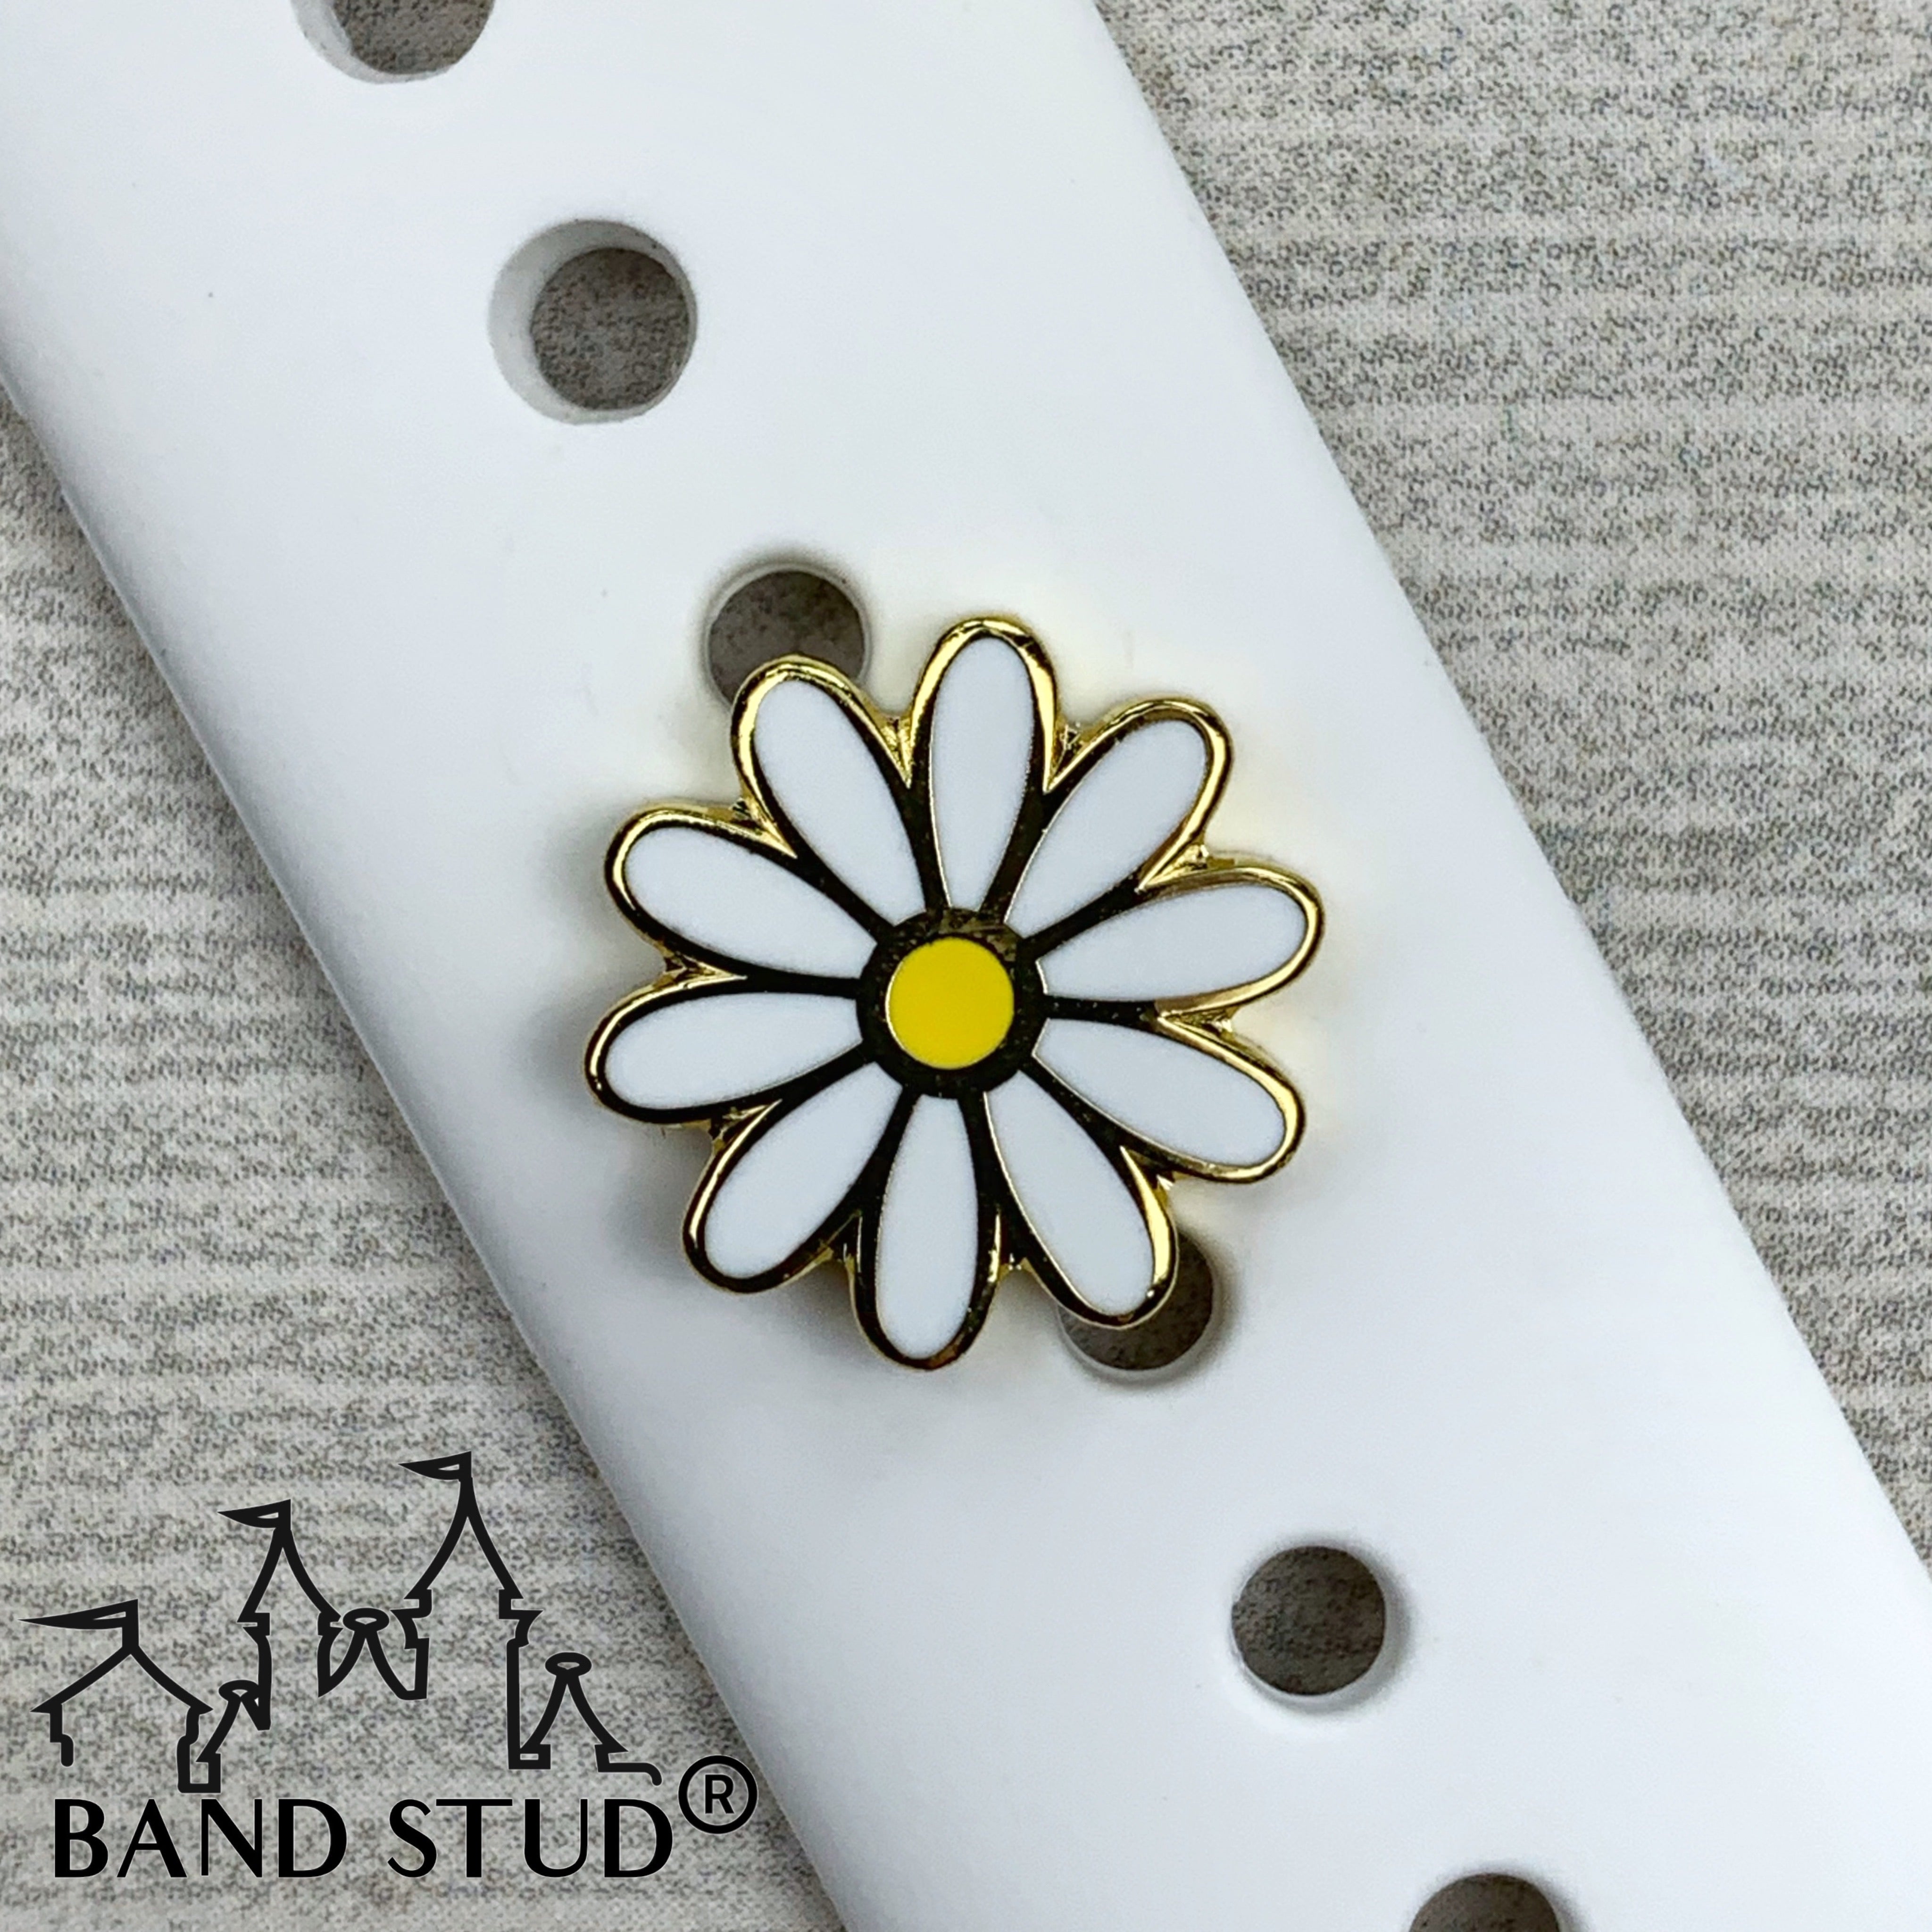 Band Stud® - Flower and Garden - Daisy